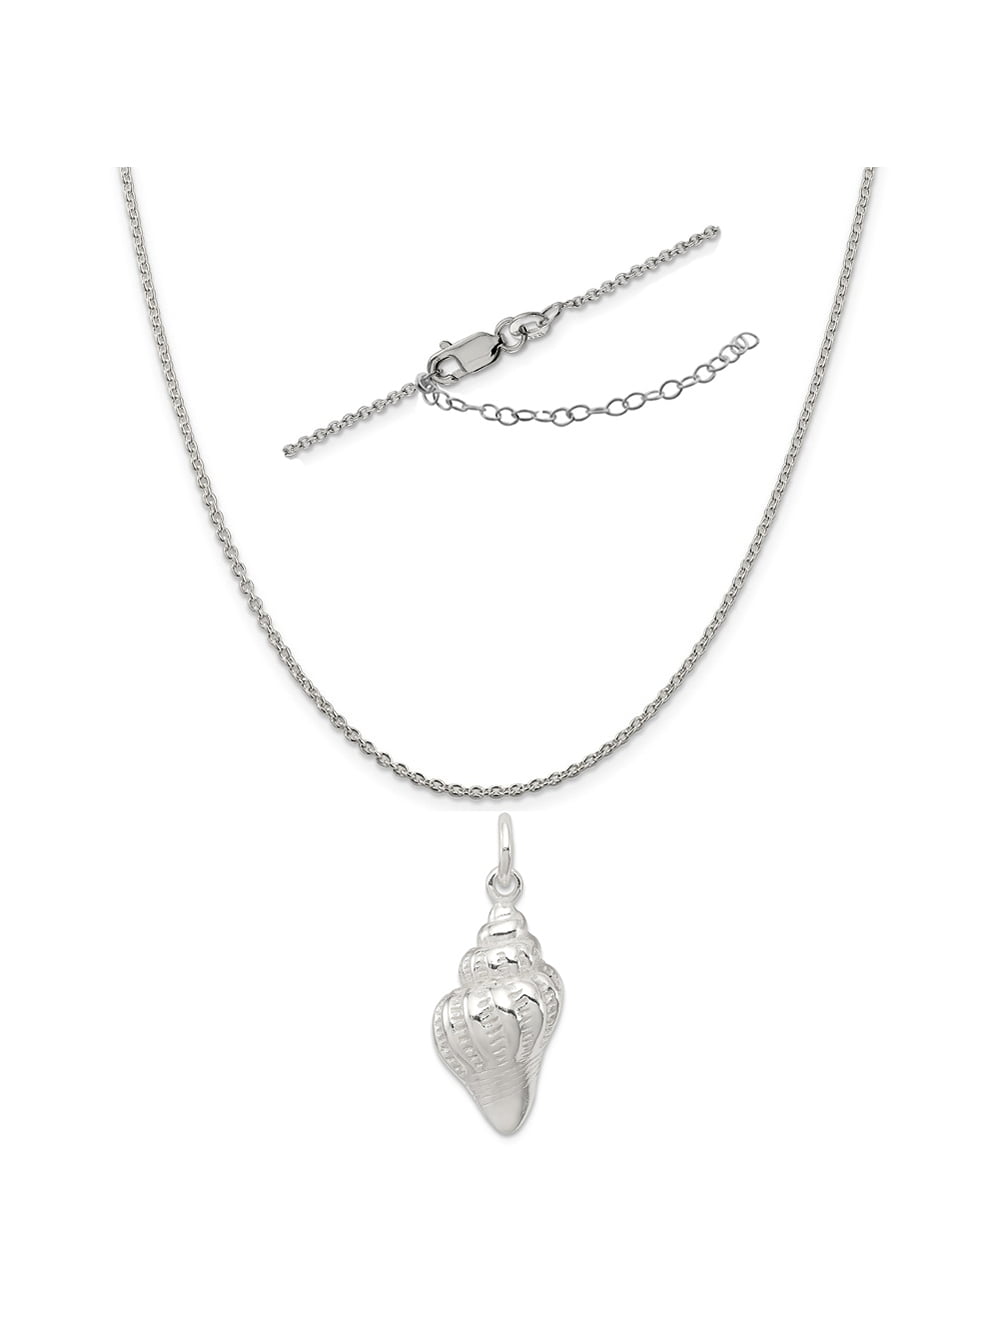 2 Extender 18 Sterling Silver Polished Seashell Charm on an Adjustable Chain Necklace